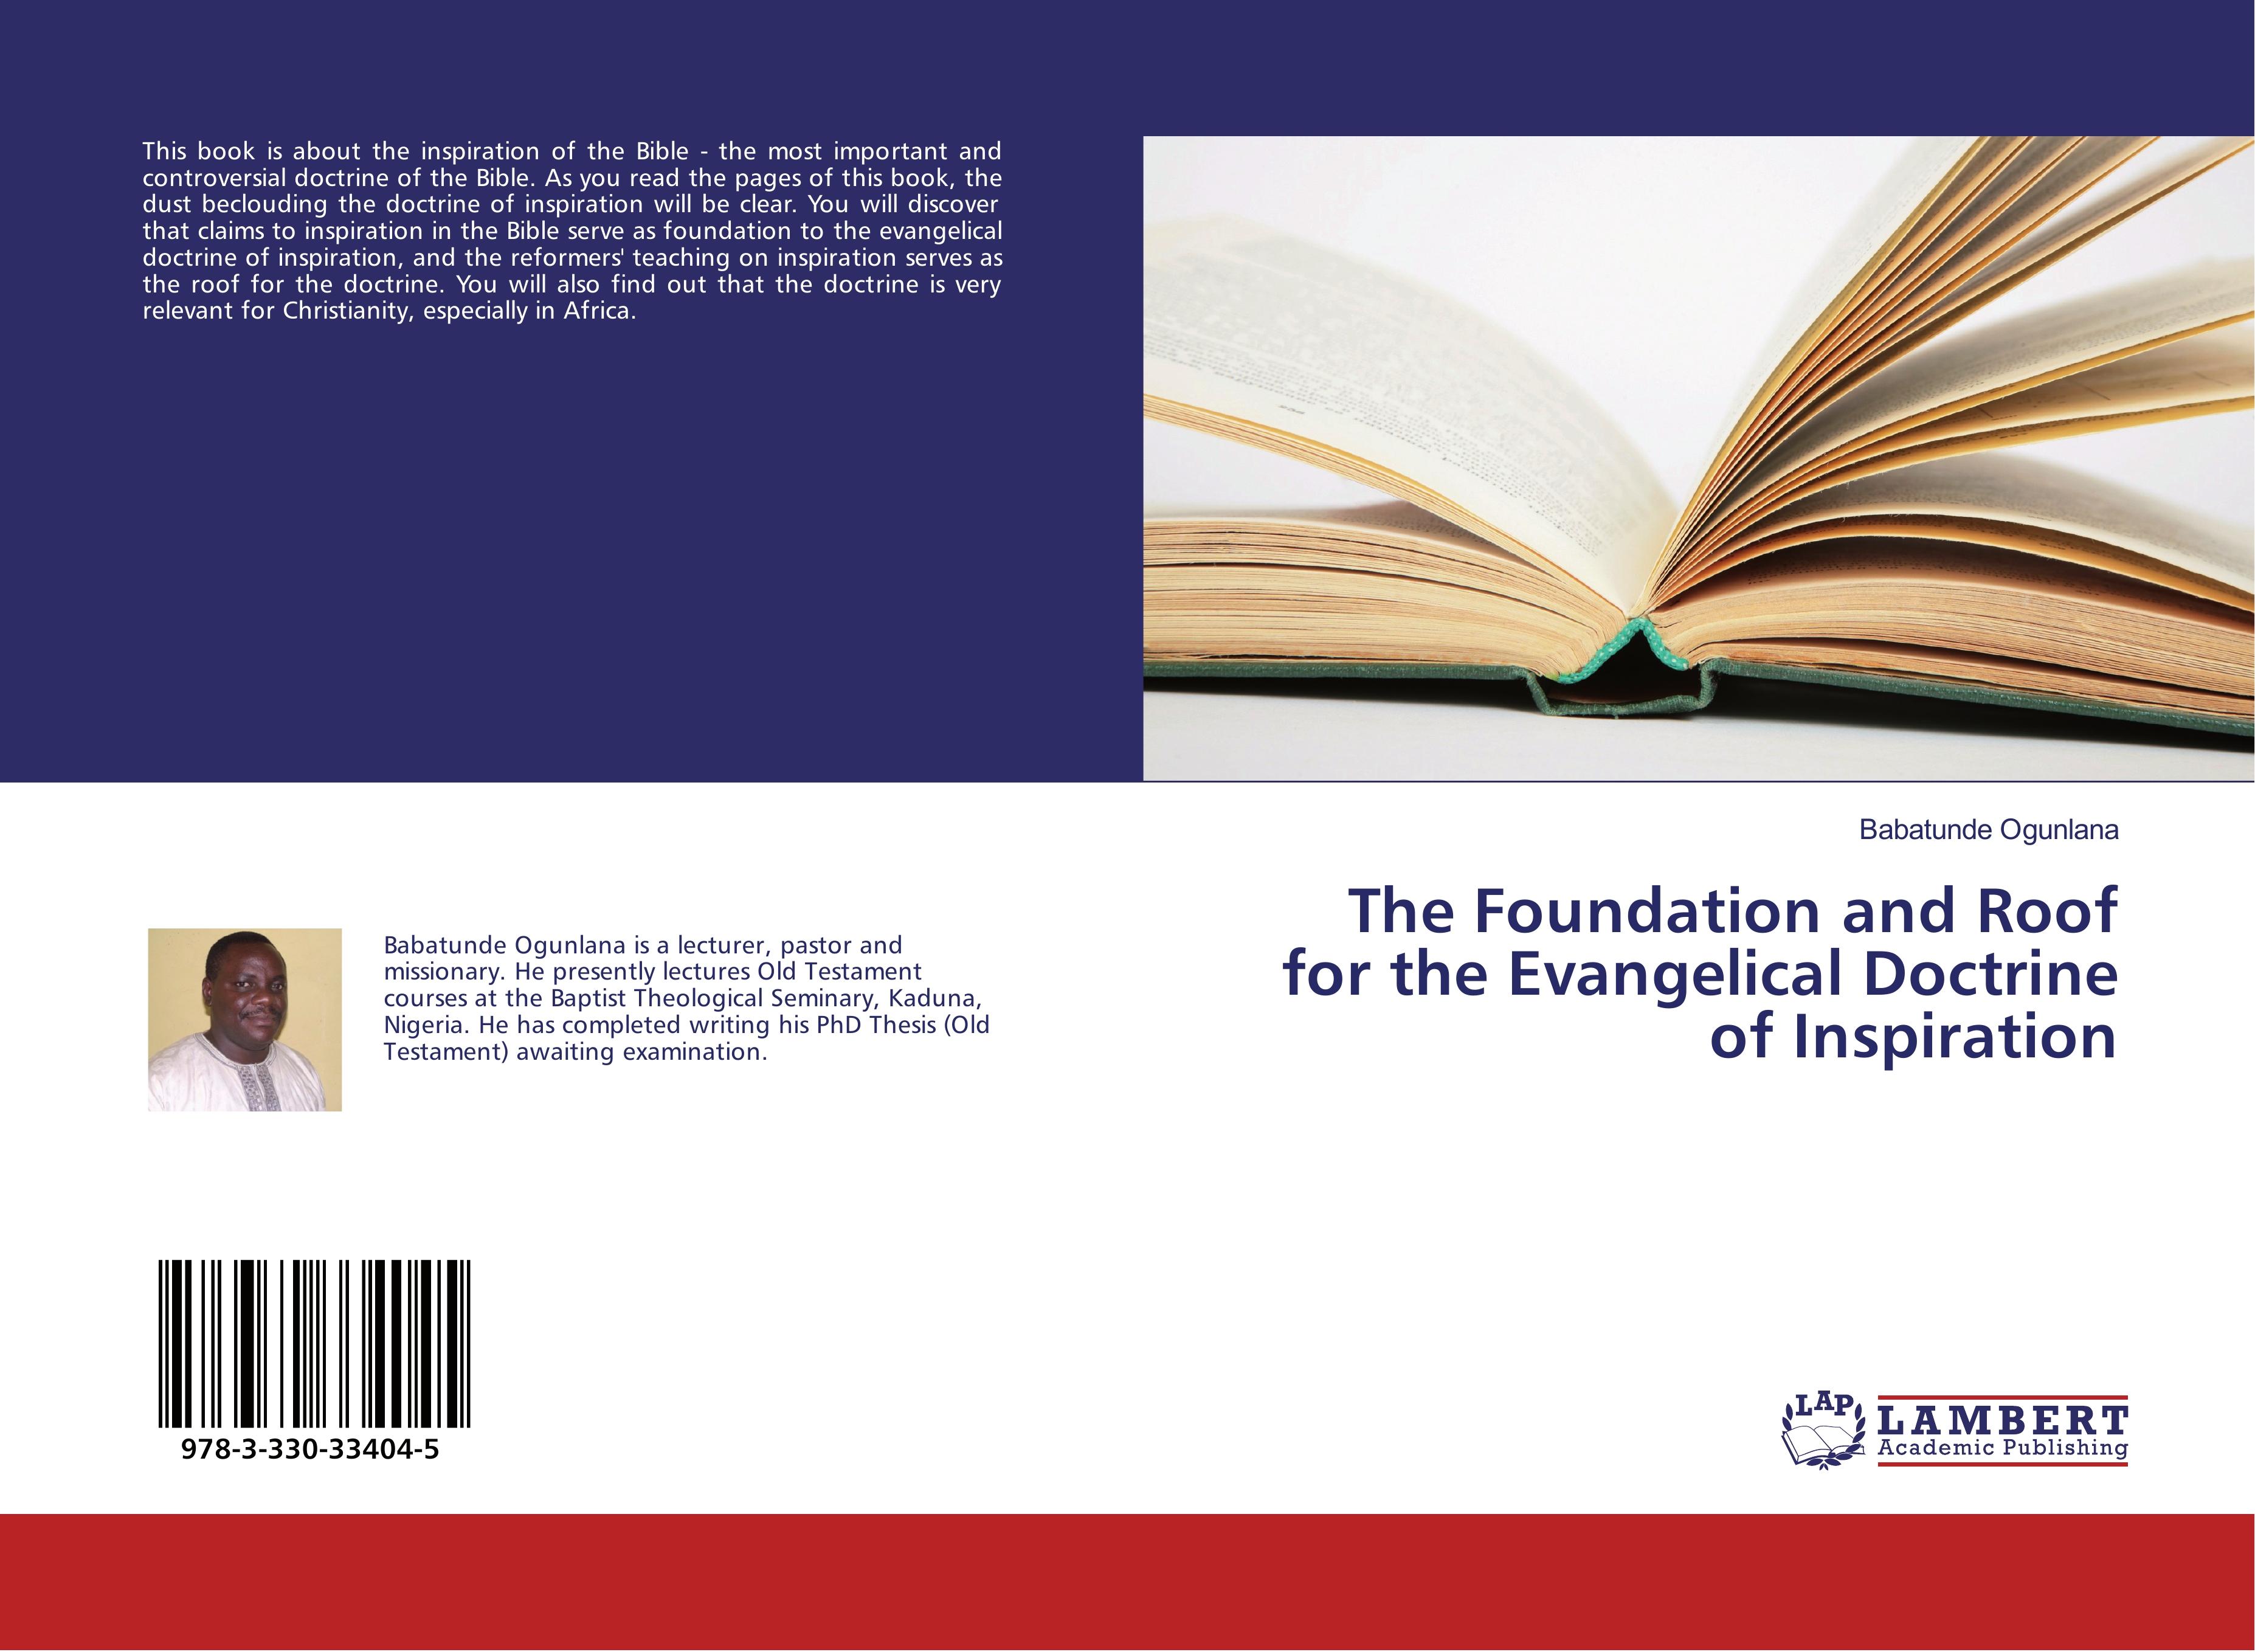 The Foundation and Roof for the Evangelical Doctrine of Inspiration - Babatunde Ogunlana